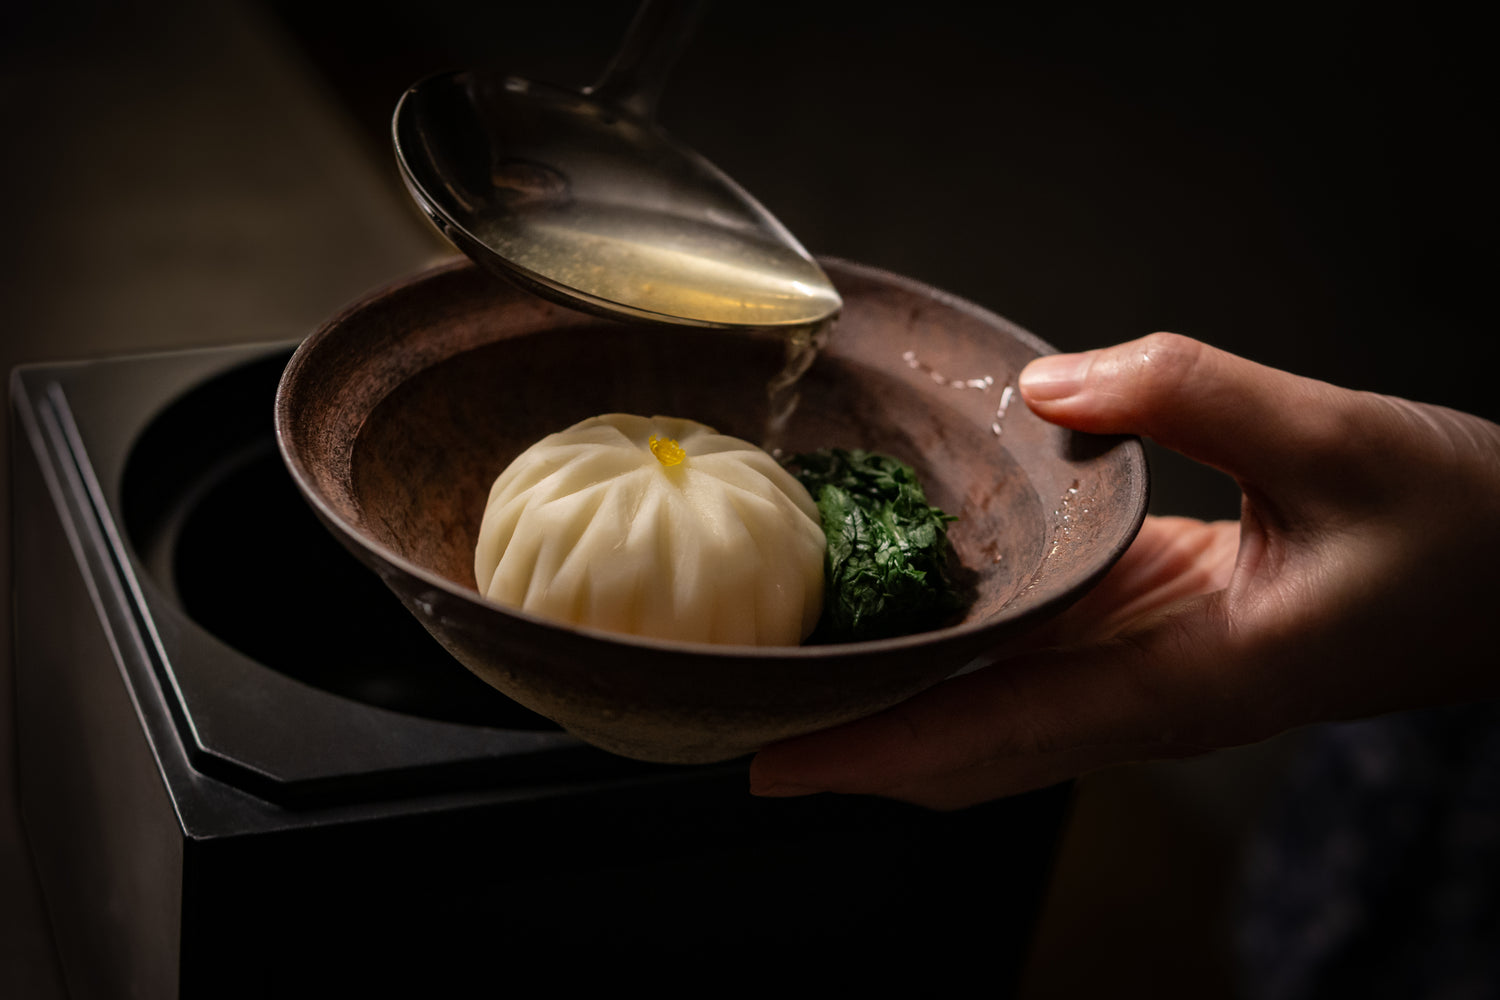 Simmered Turnips with Chrysanthemum Decoration